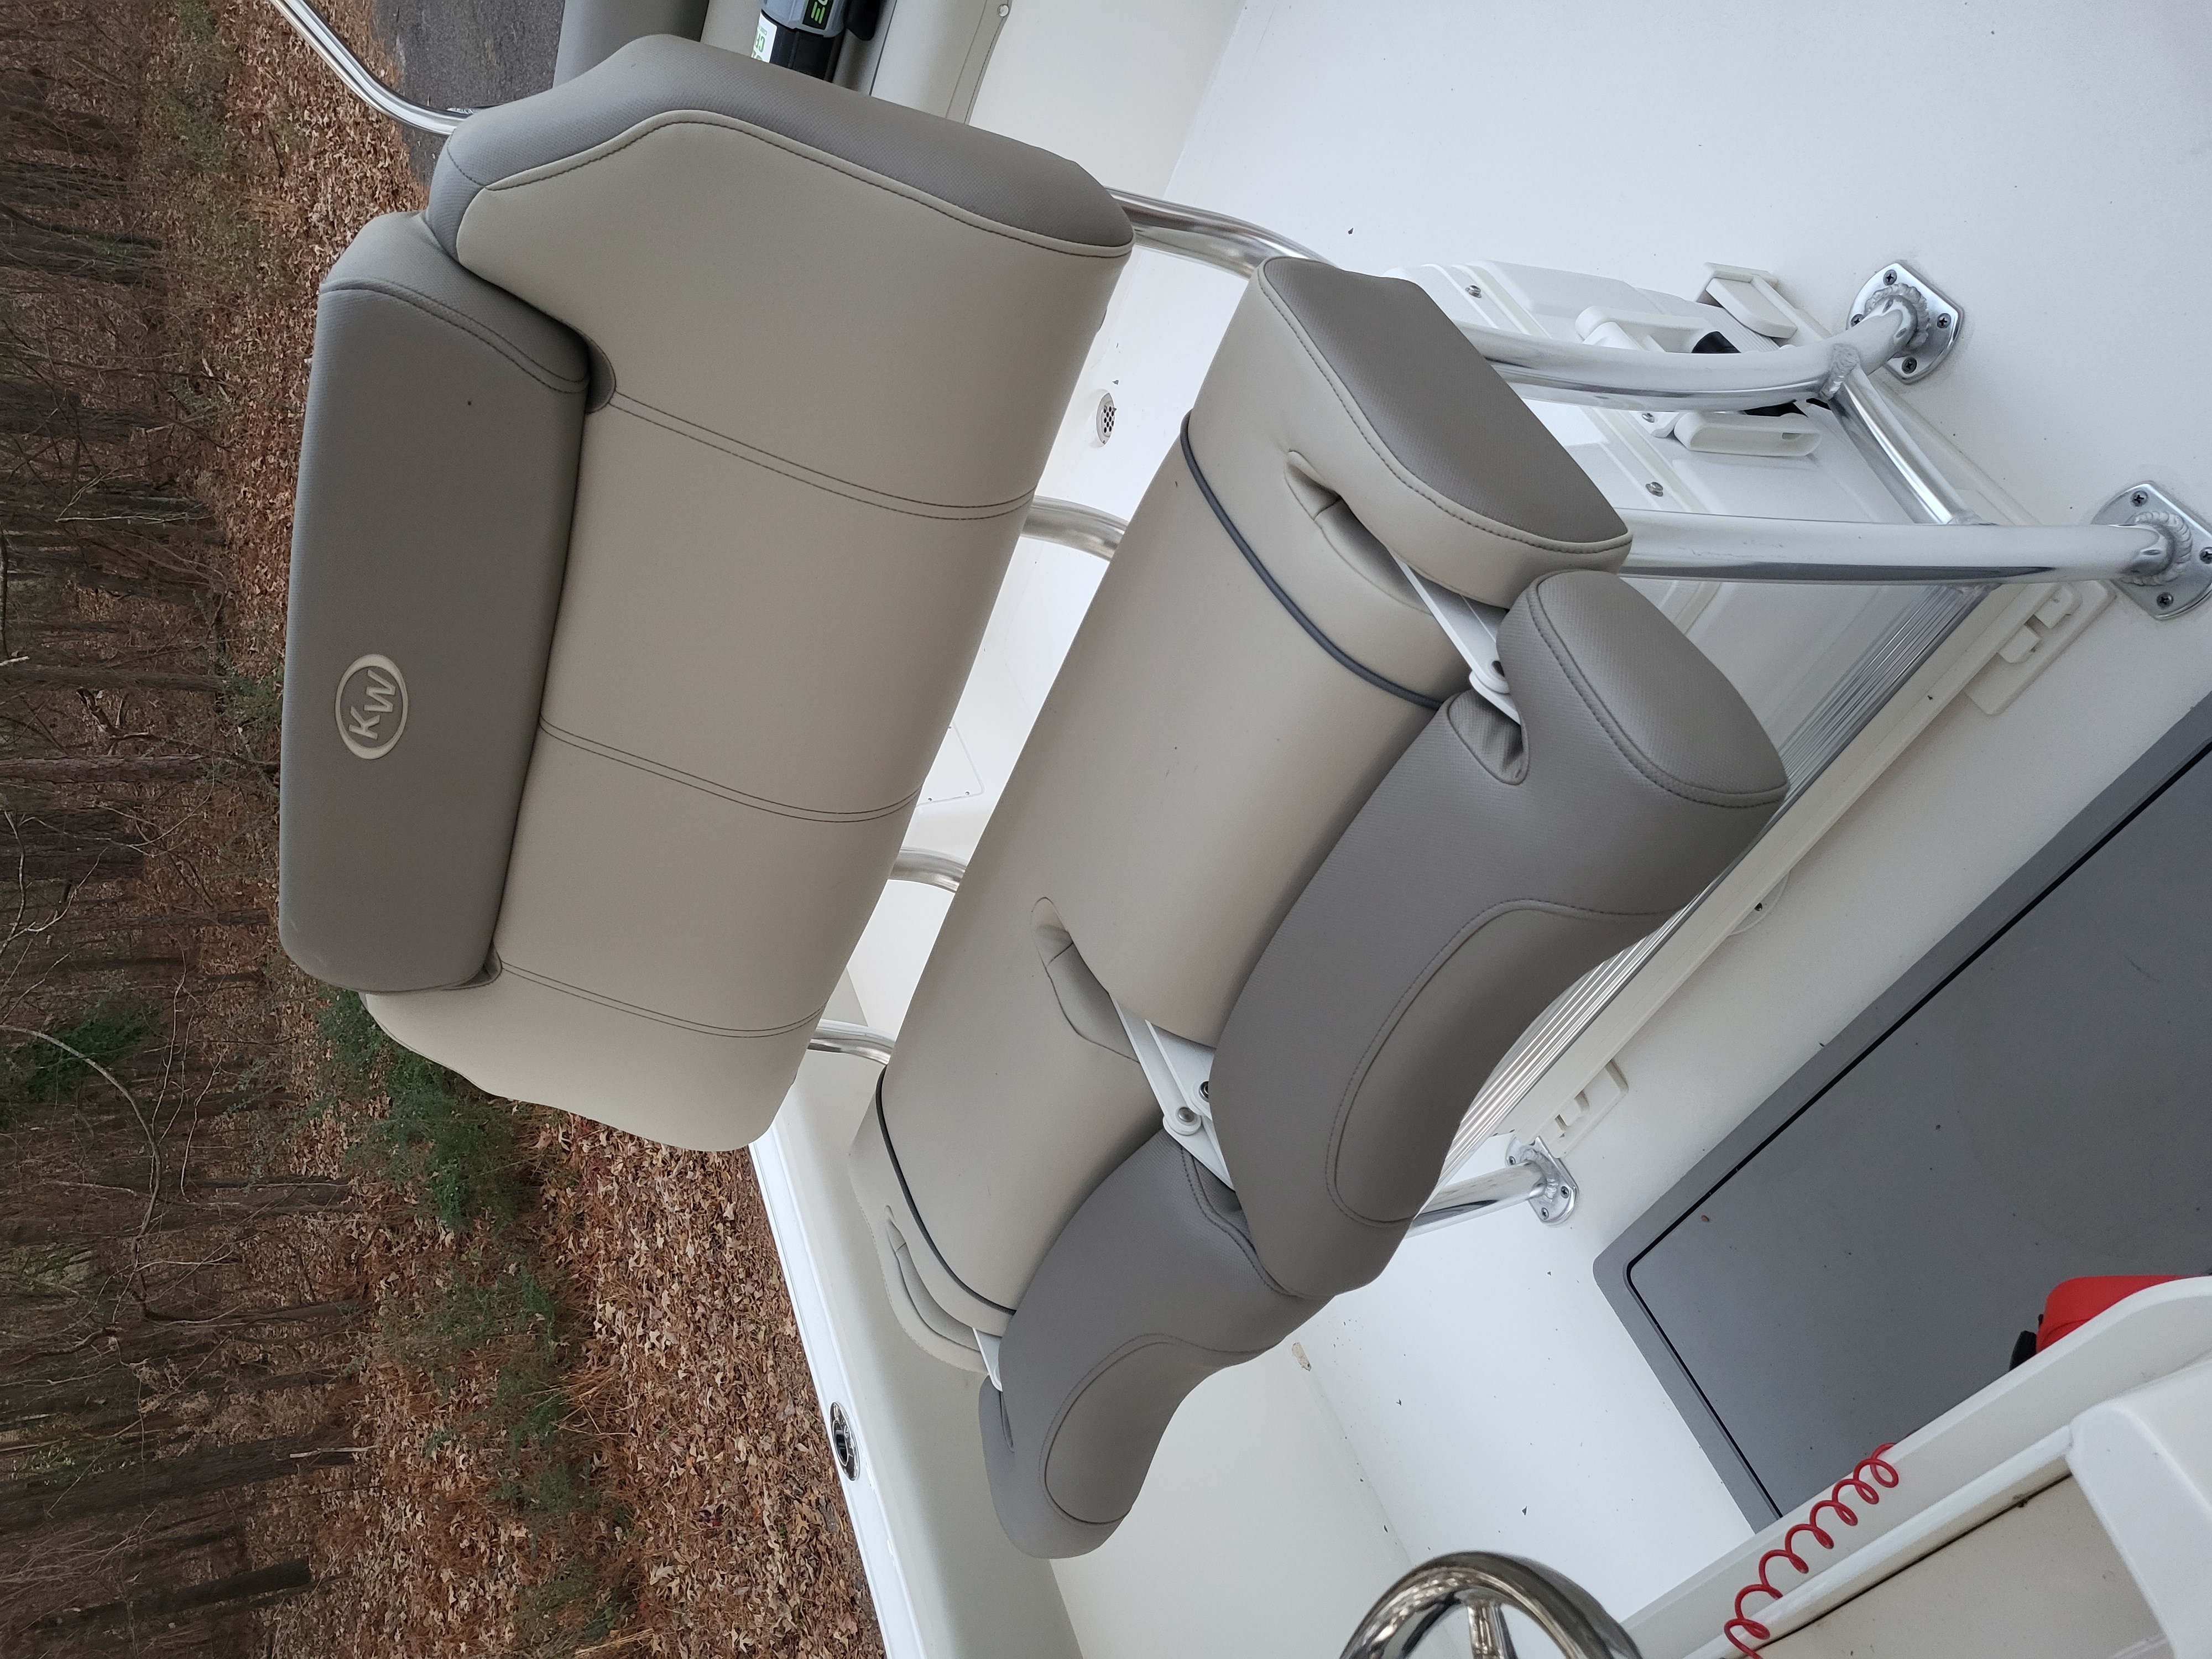 2022 Key West 239FS Power boat for sale in Laurinburg, NC - image 14 